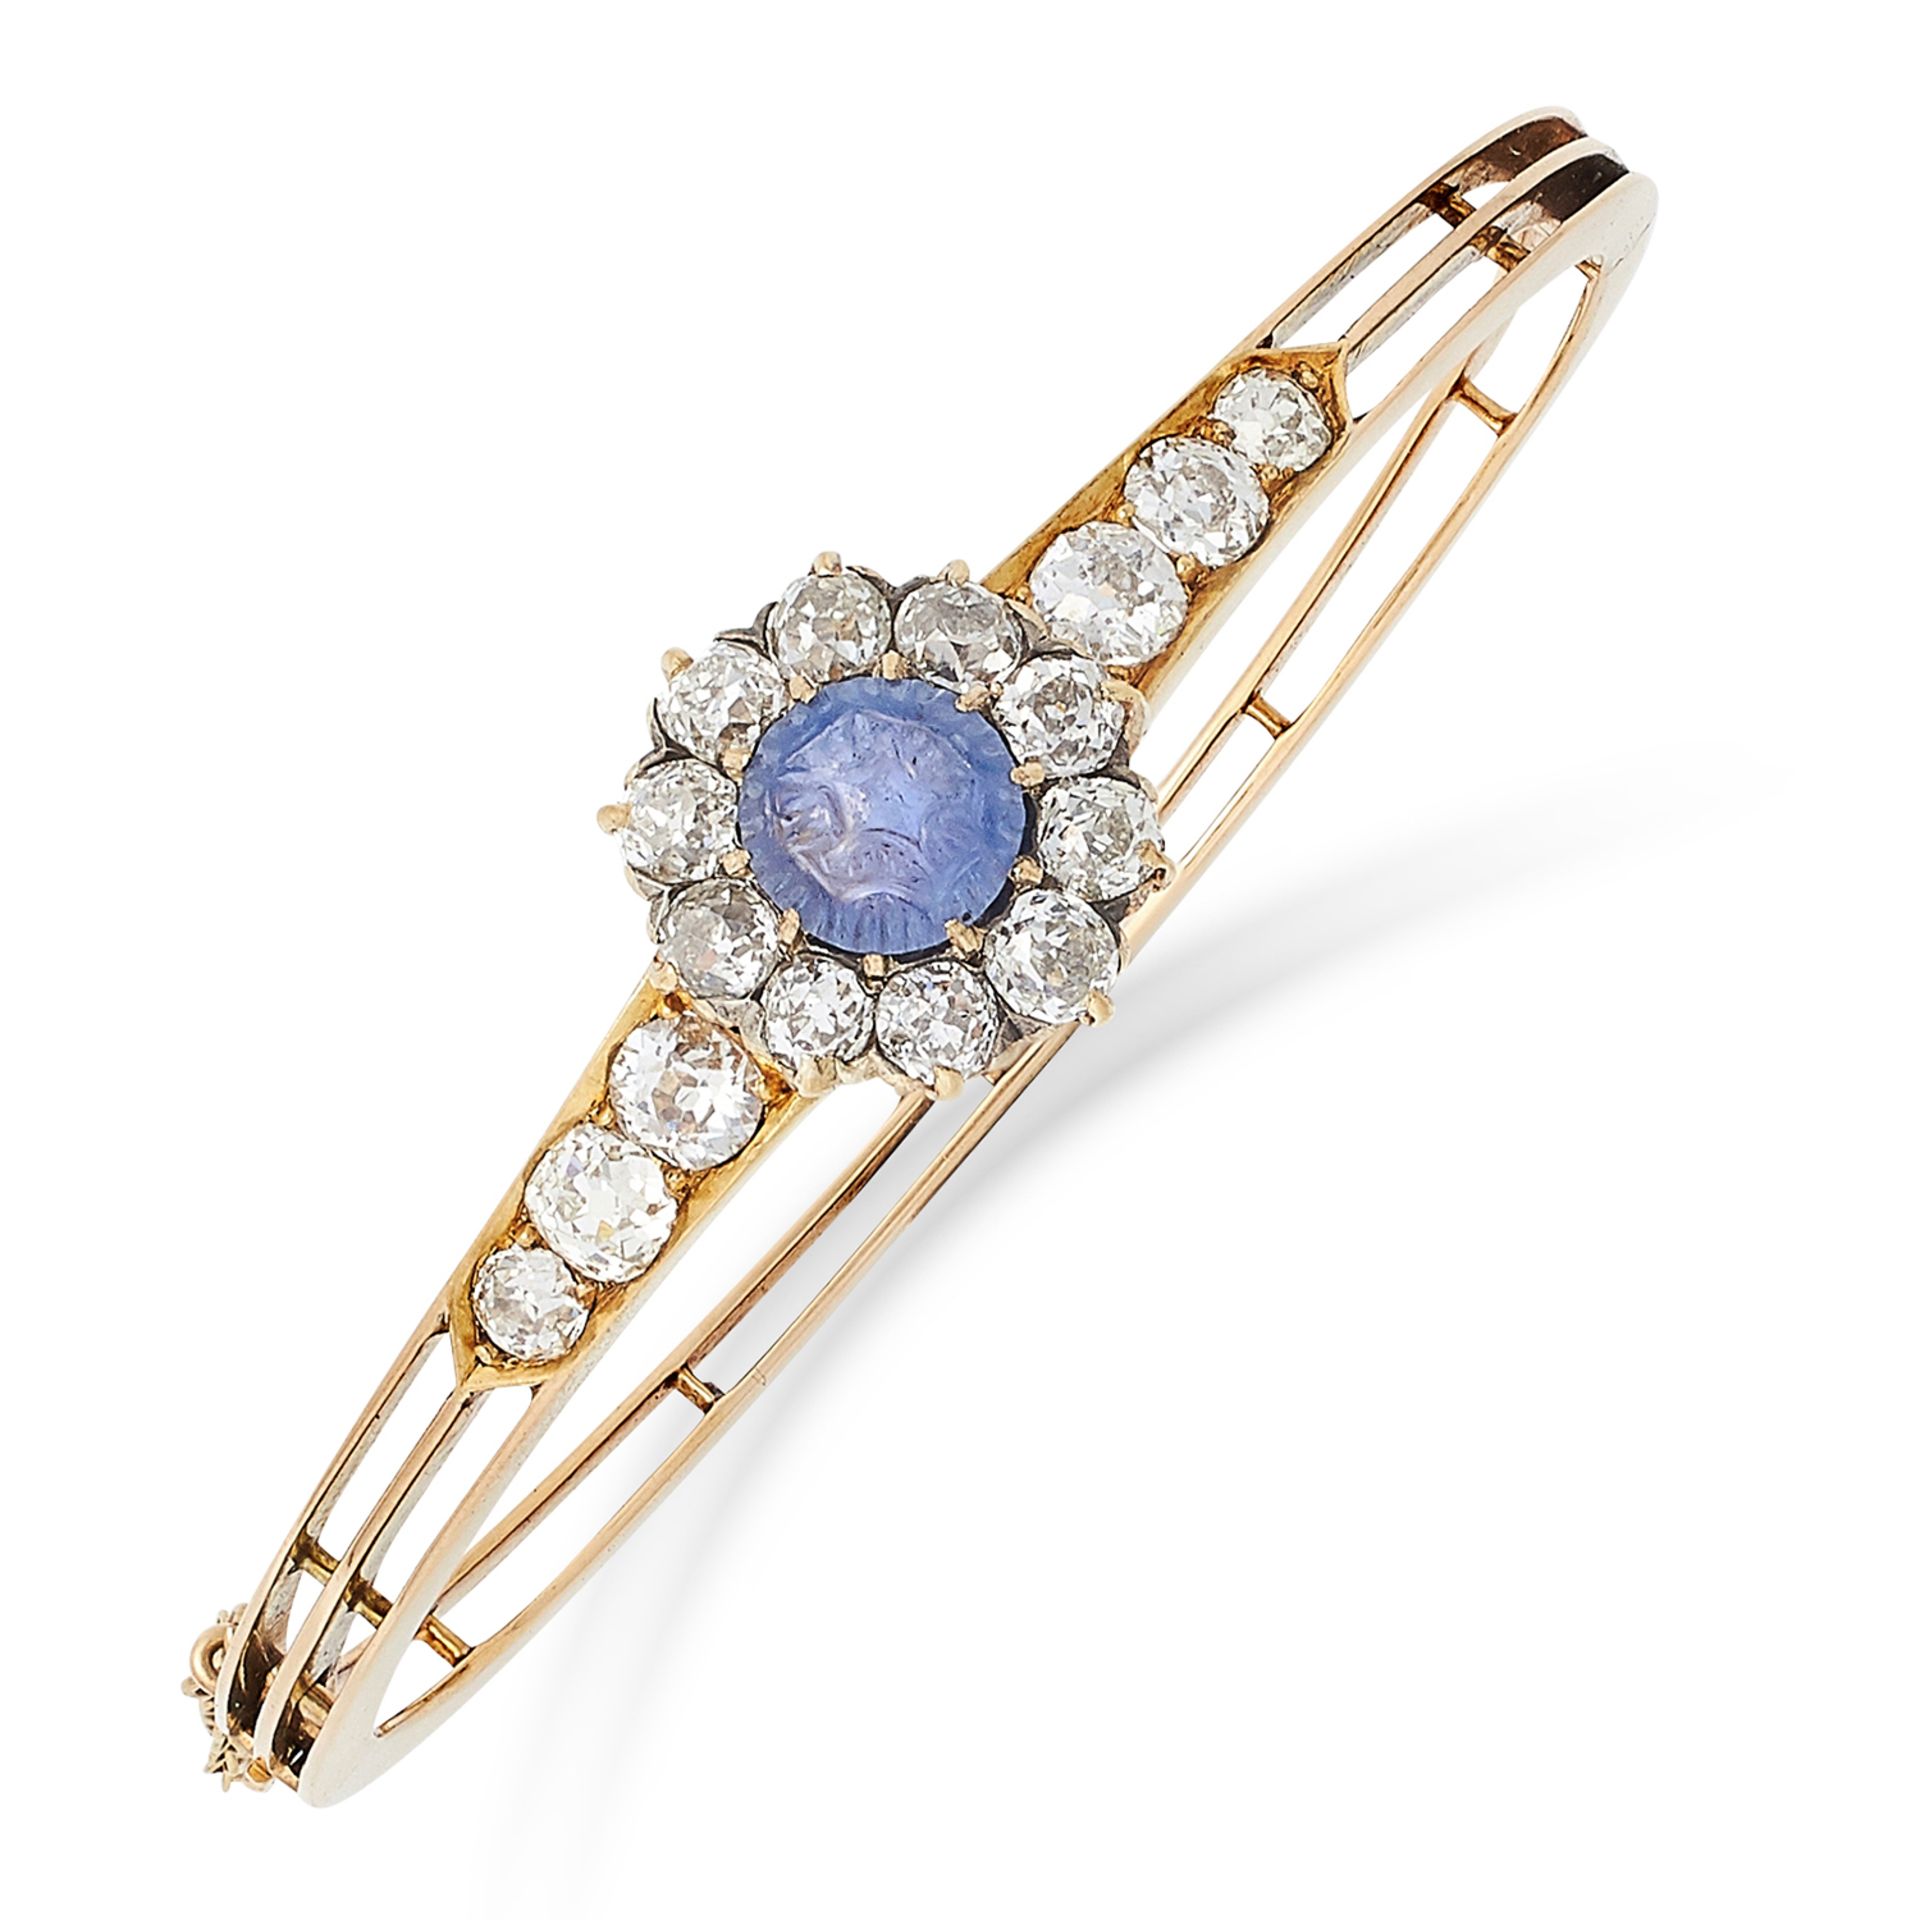 ANTIQUE SAPPHIRE AND DIAMOND BANGLE set with a Mughal carved sapphire and old cut diamonds totalling